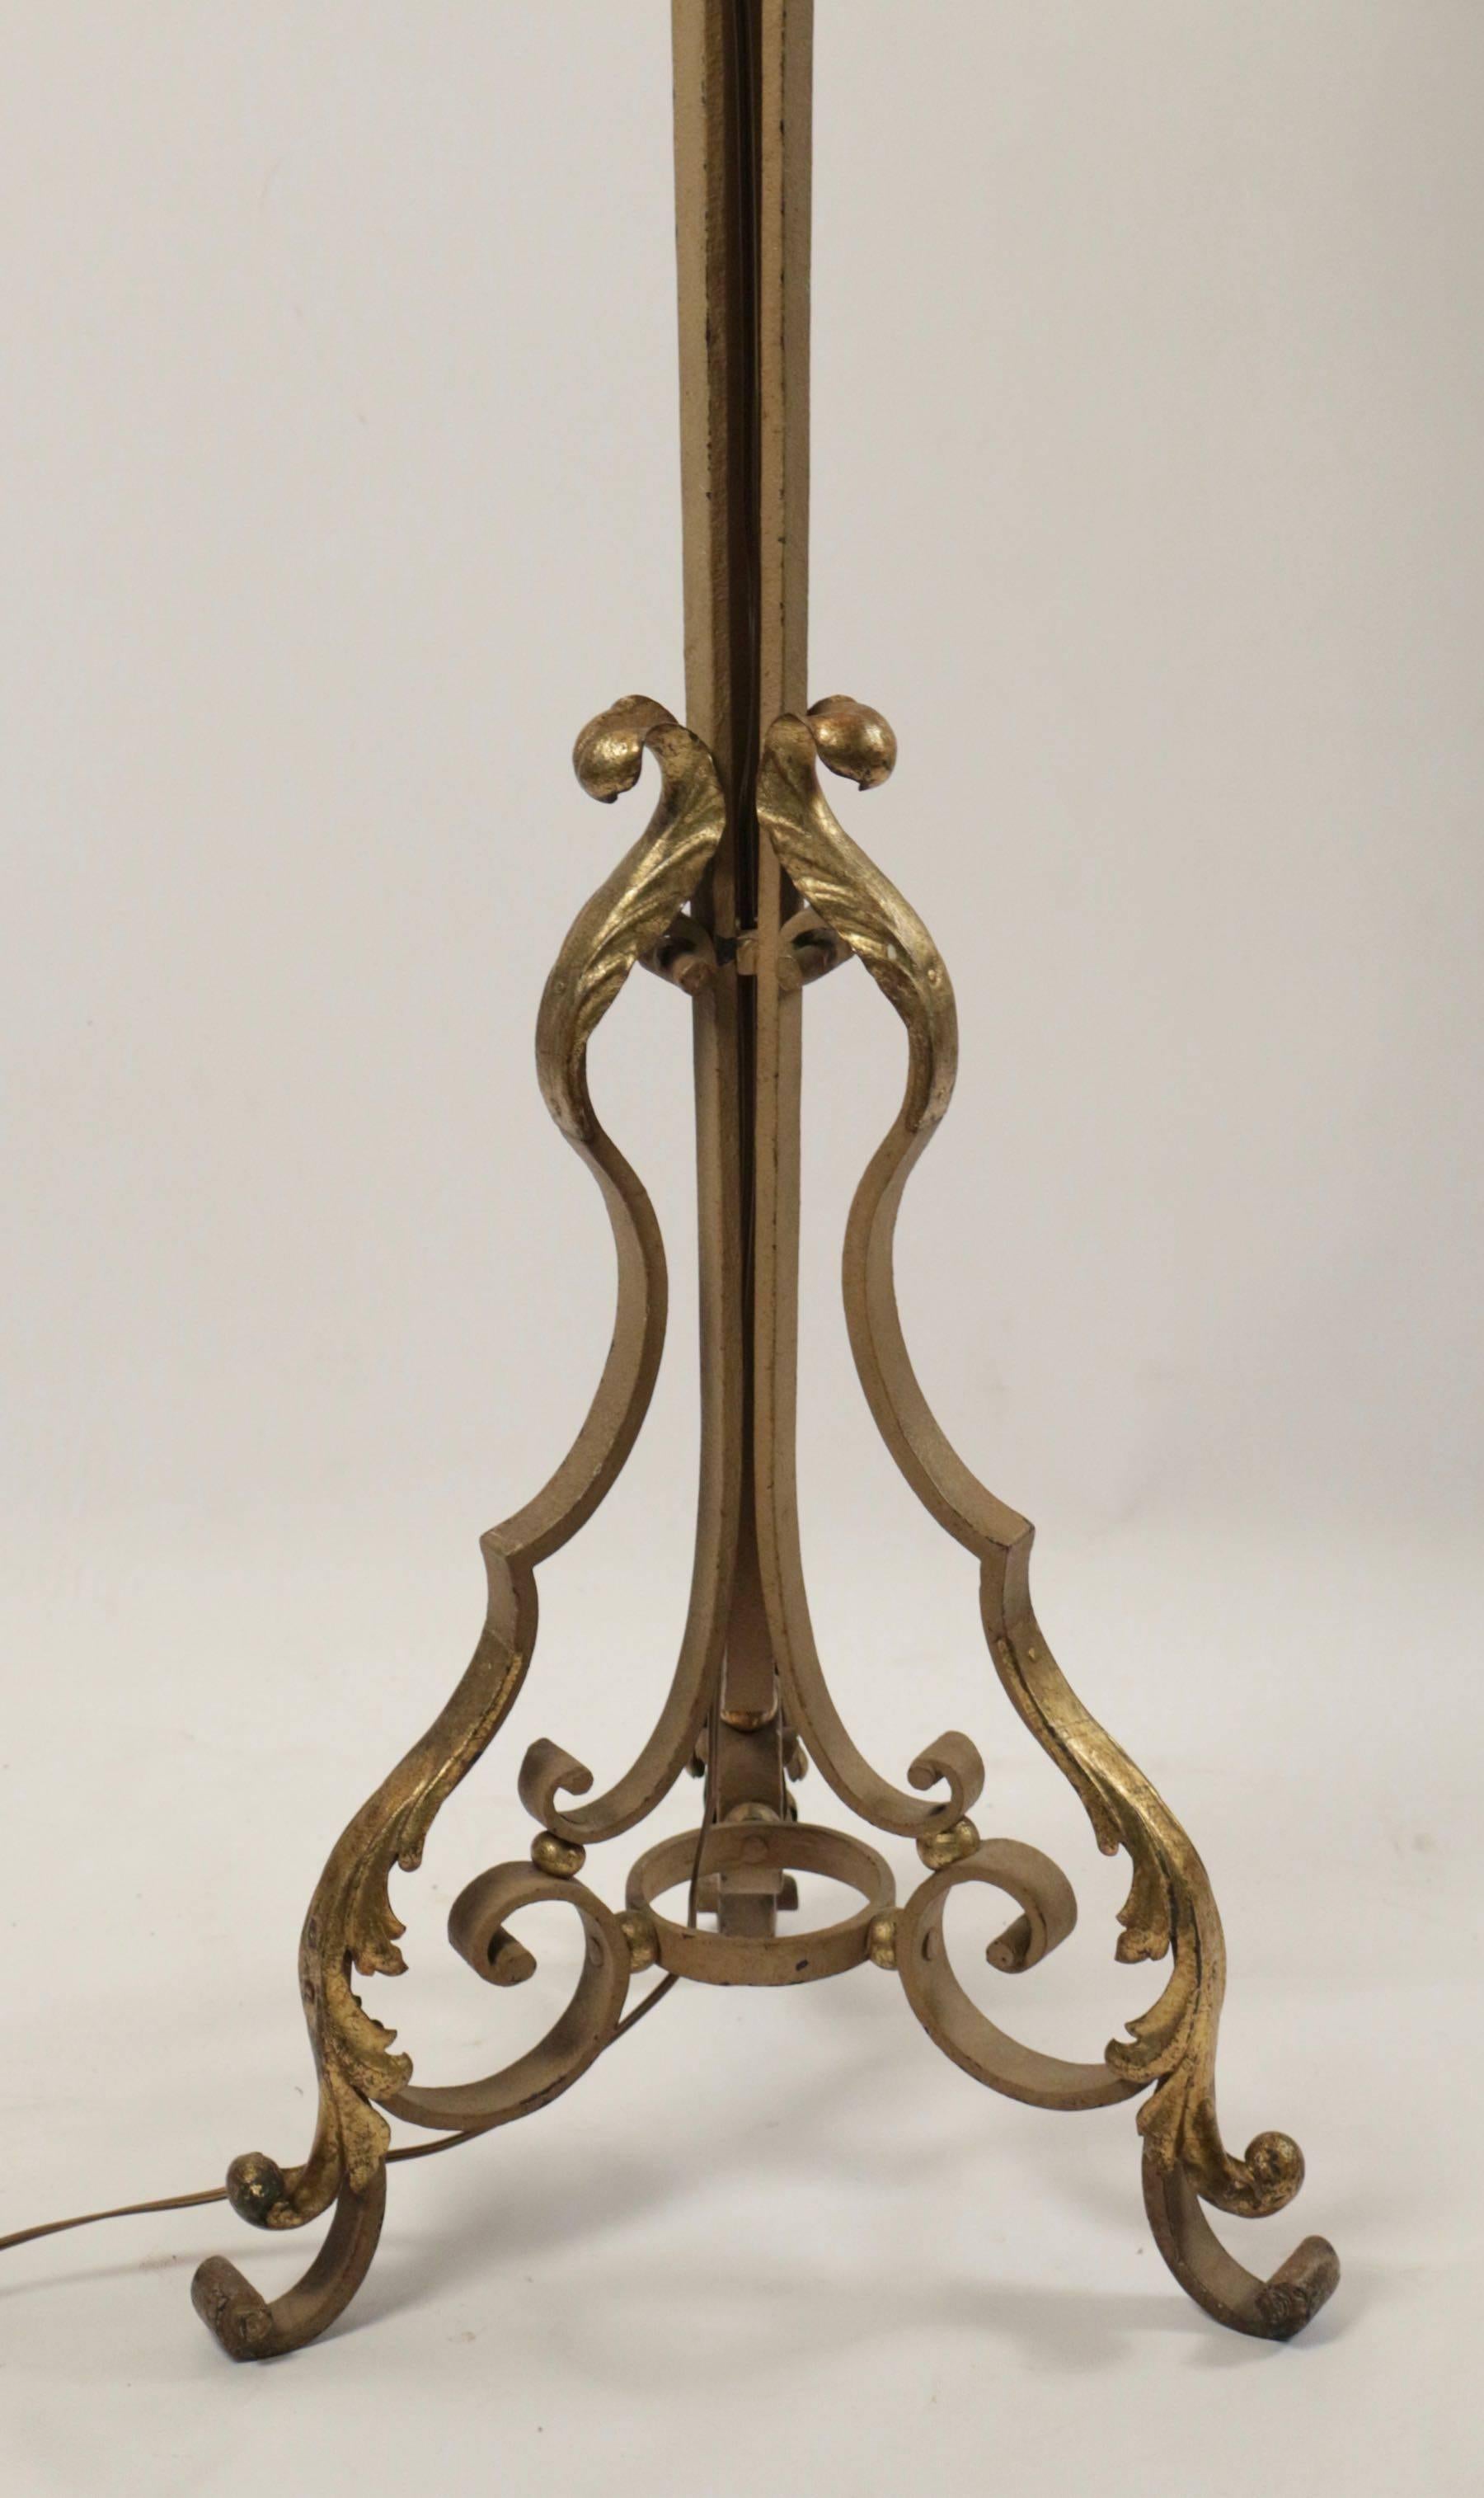 Napoleon III Beautiful Standing Lamp in Wrought Iron with Gold Gilded Accents